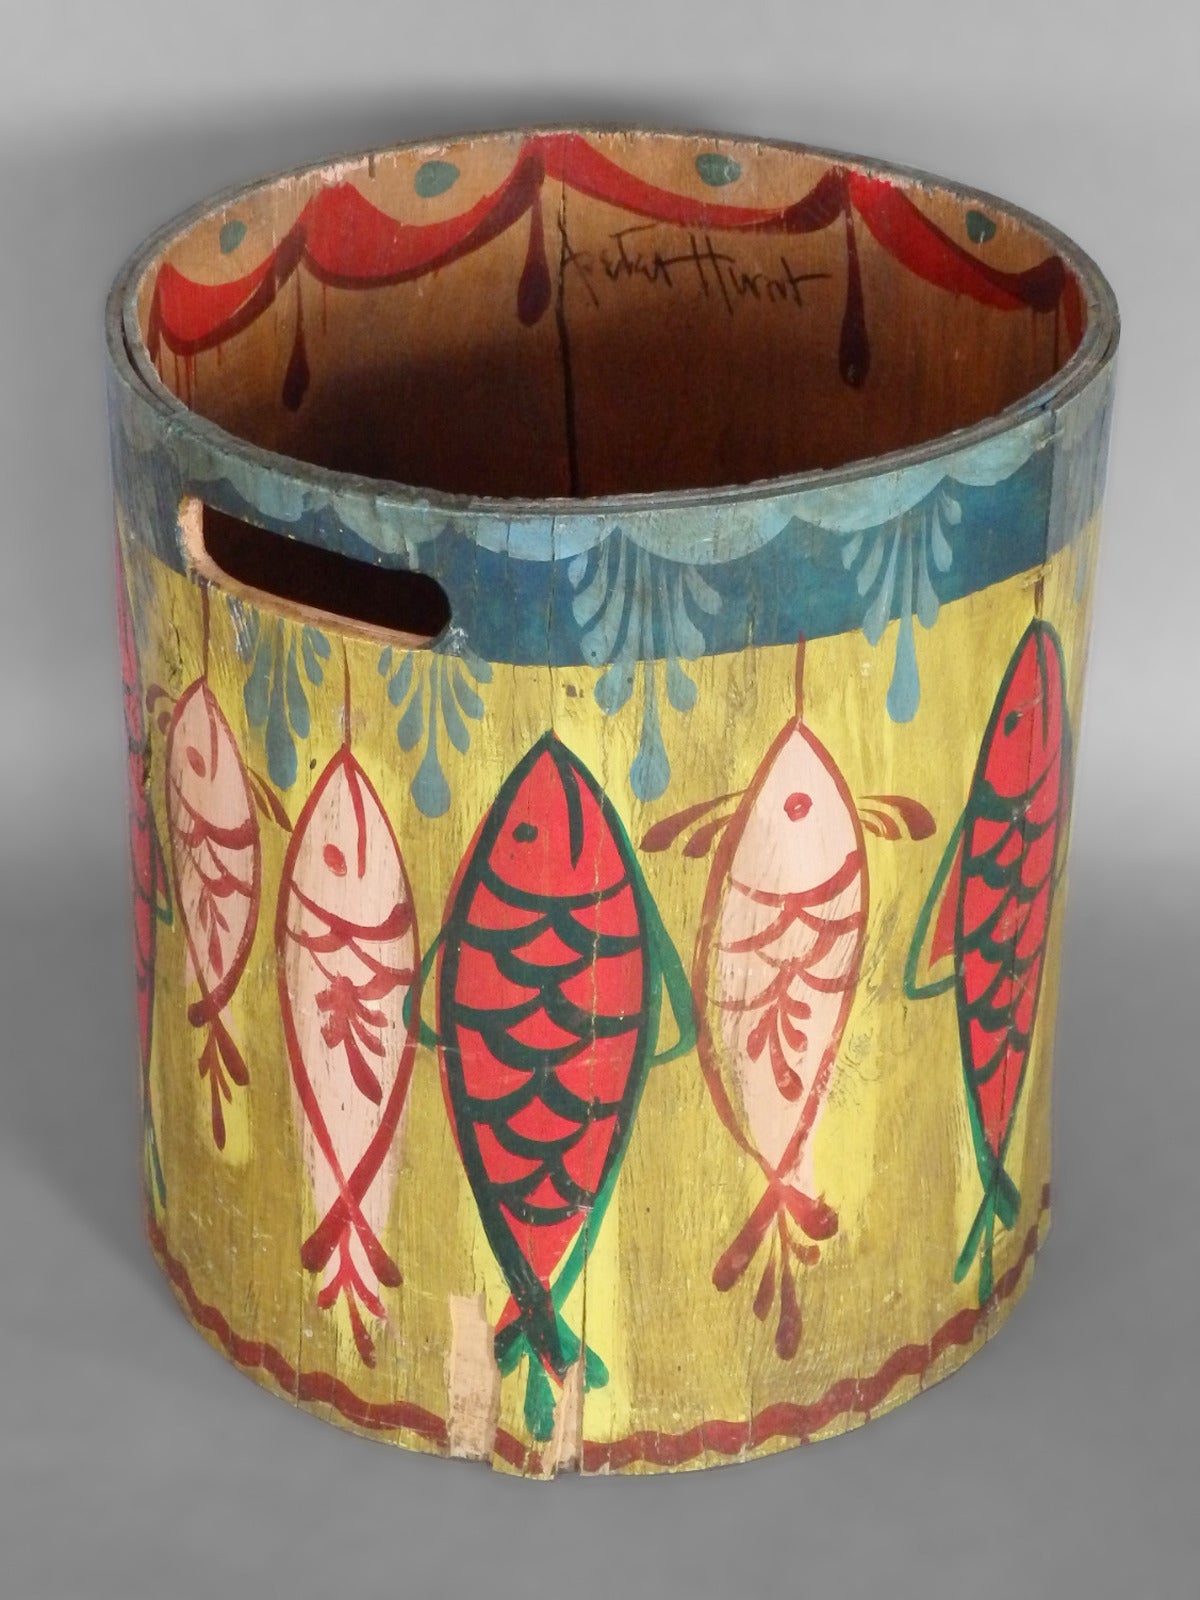 Folk painted modernist trash can by Peter Hunt 1898-1967.
Provincetown and Orleans Massachusetts, U.S.A.